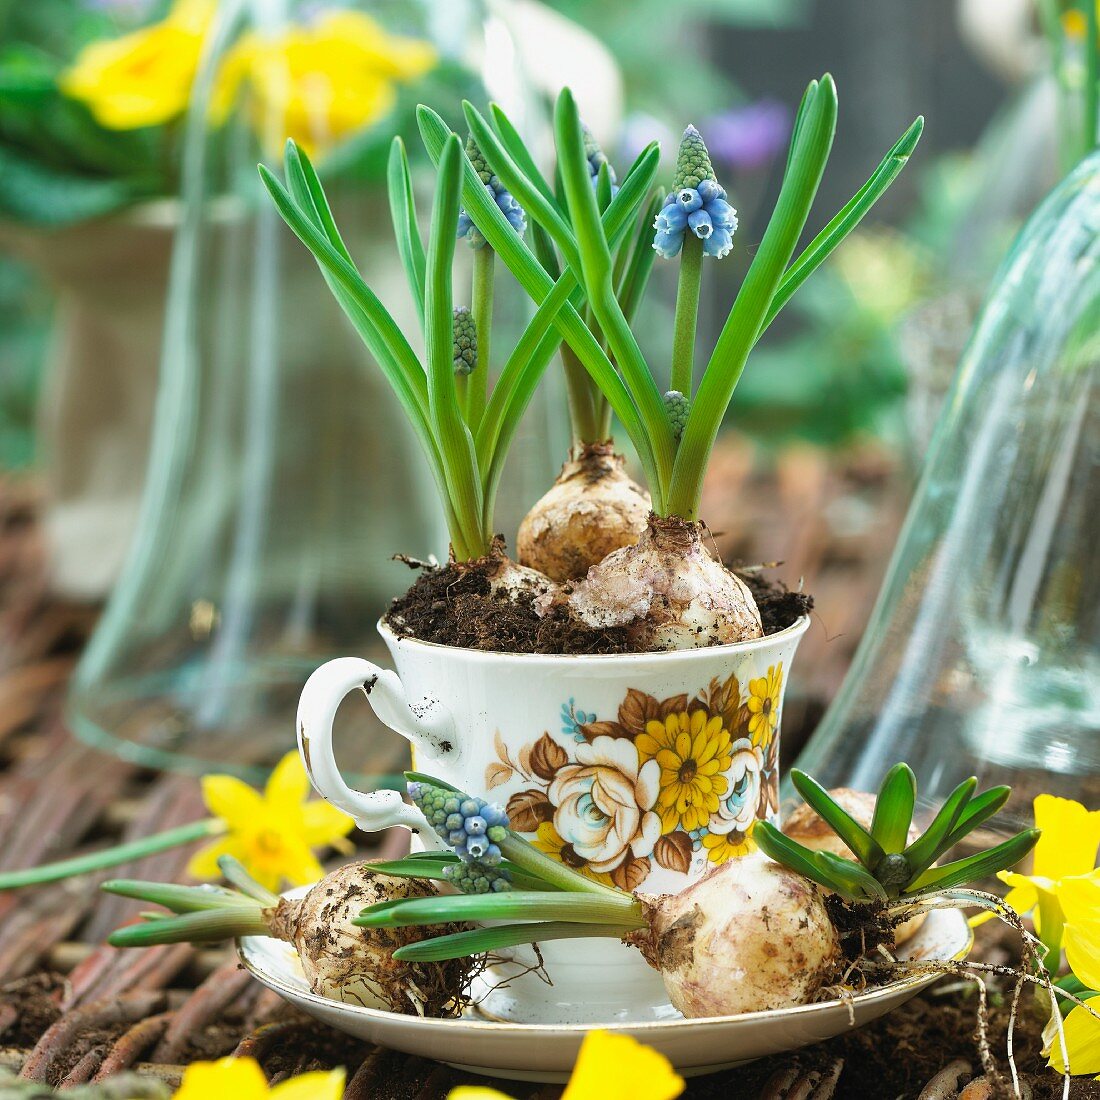 Grape hyacinths planted in a cup